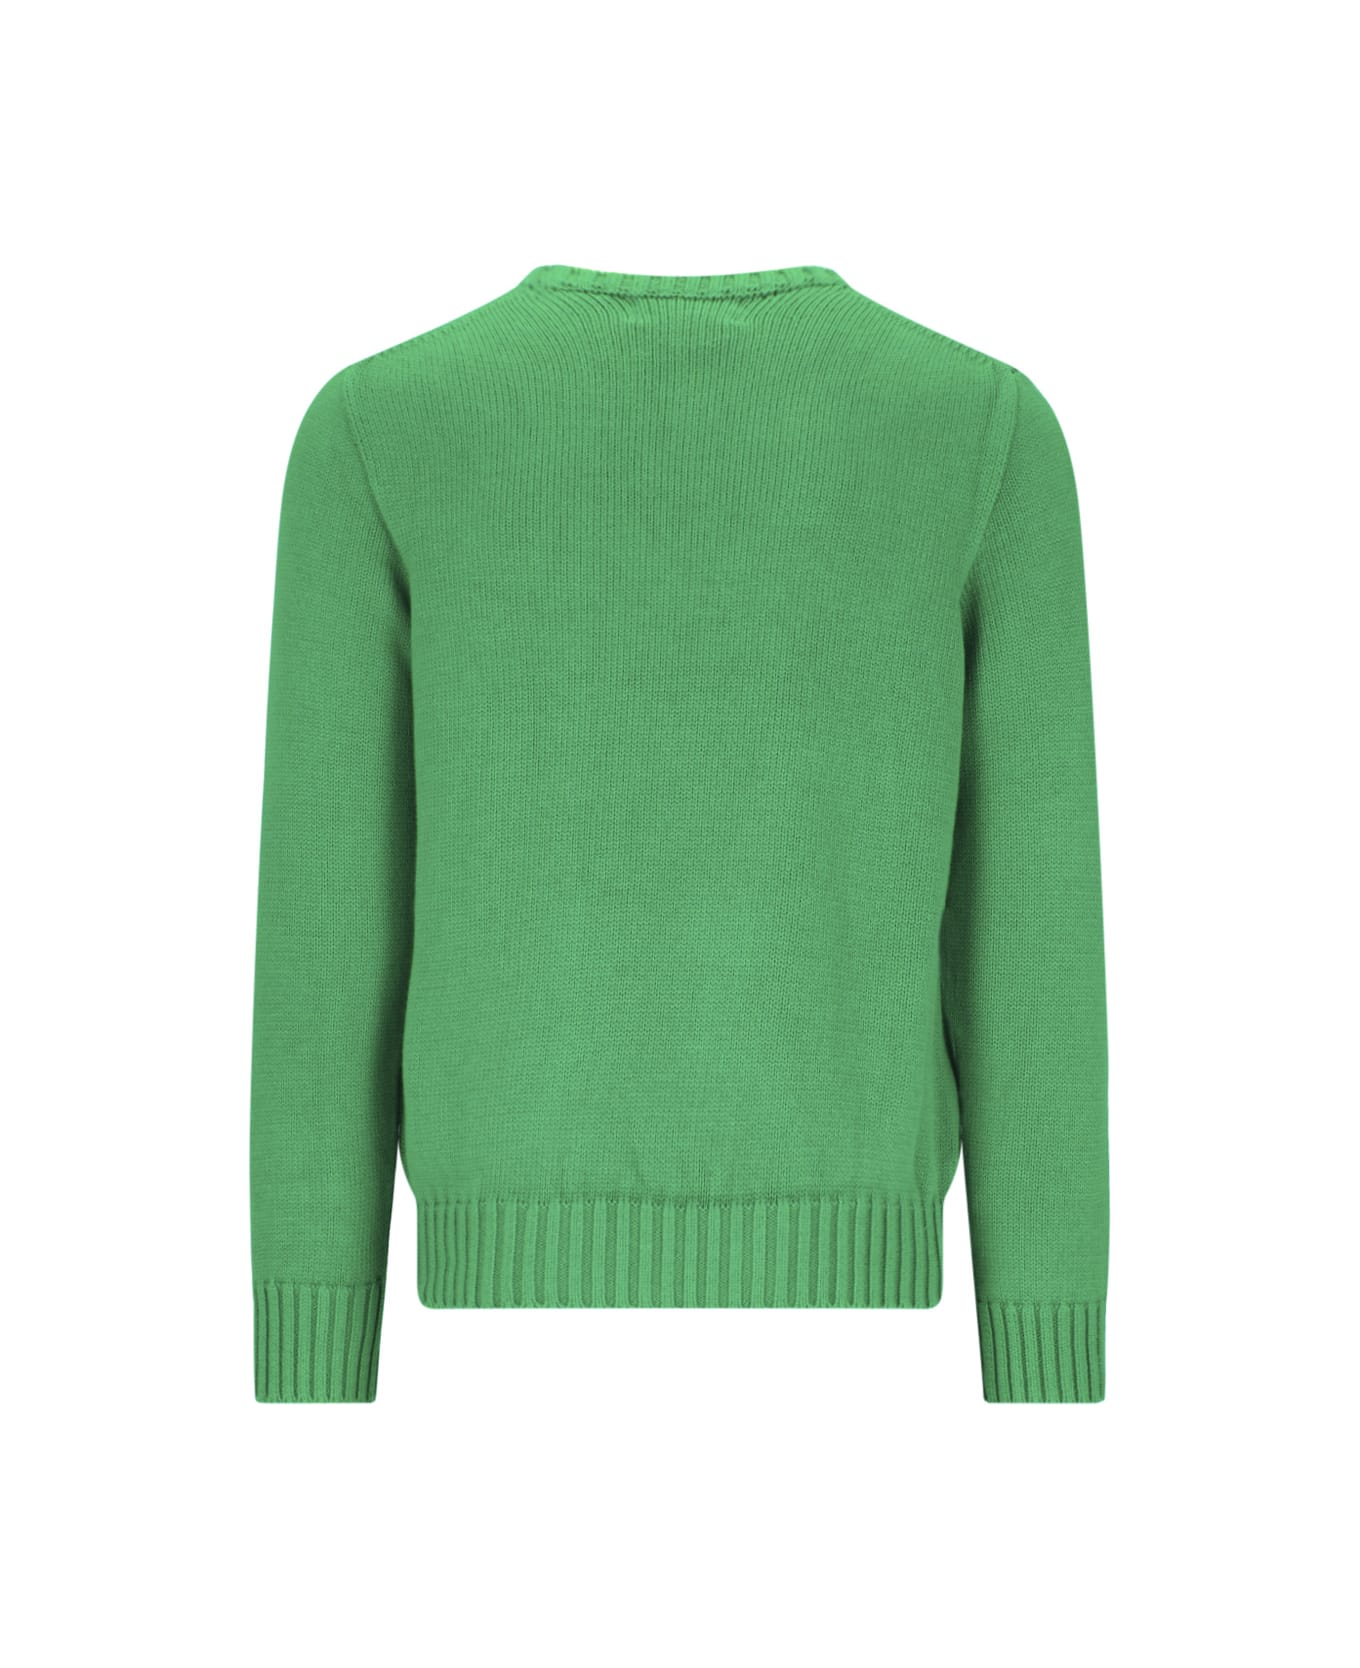 Ralph Lauren Iconic Embroidery Sweater - GREEN